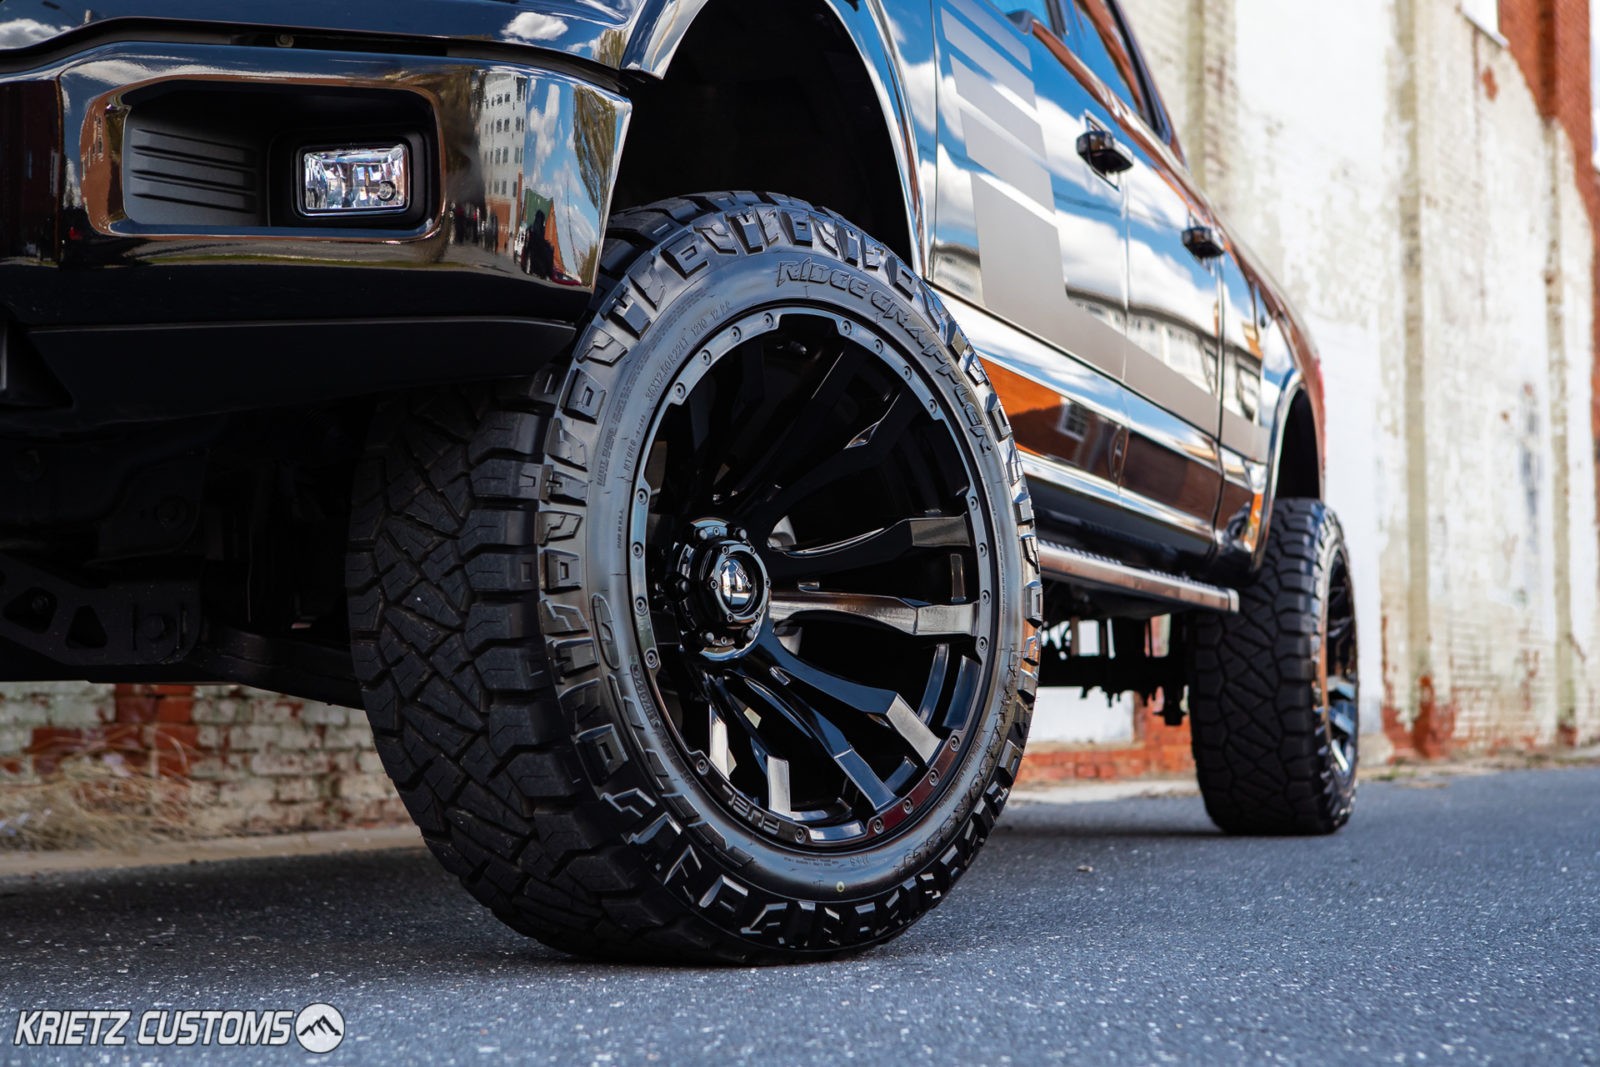 Lifted 2019 Ford F-150 with 22×12 Fuel Blitz Wheels and 6 inch Rough